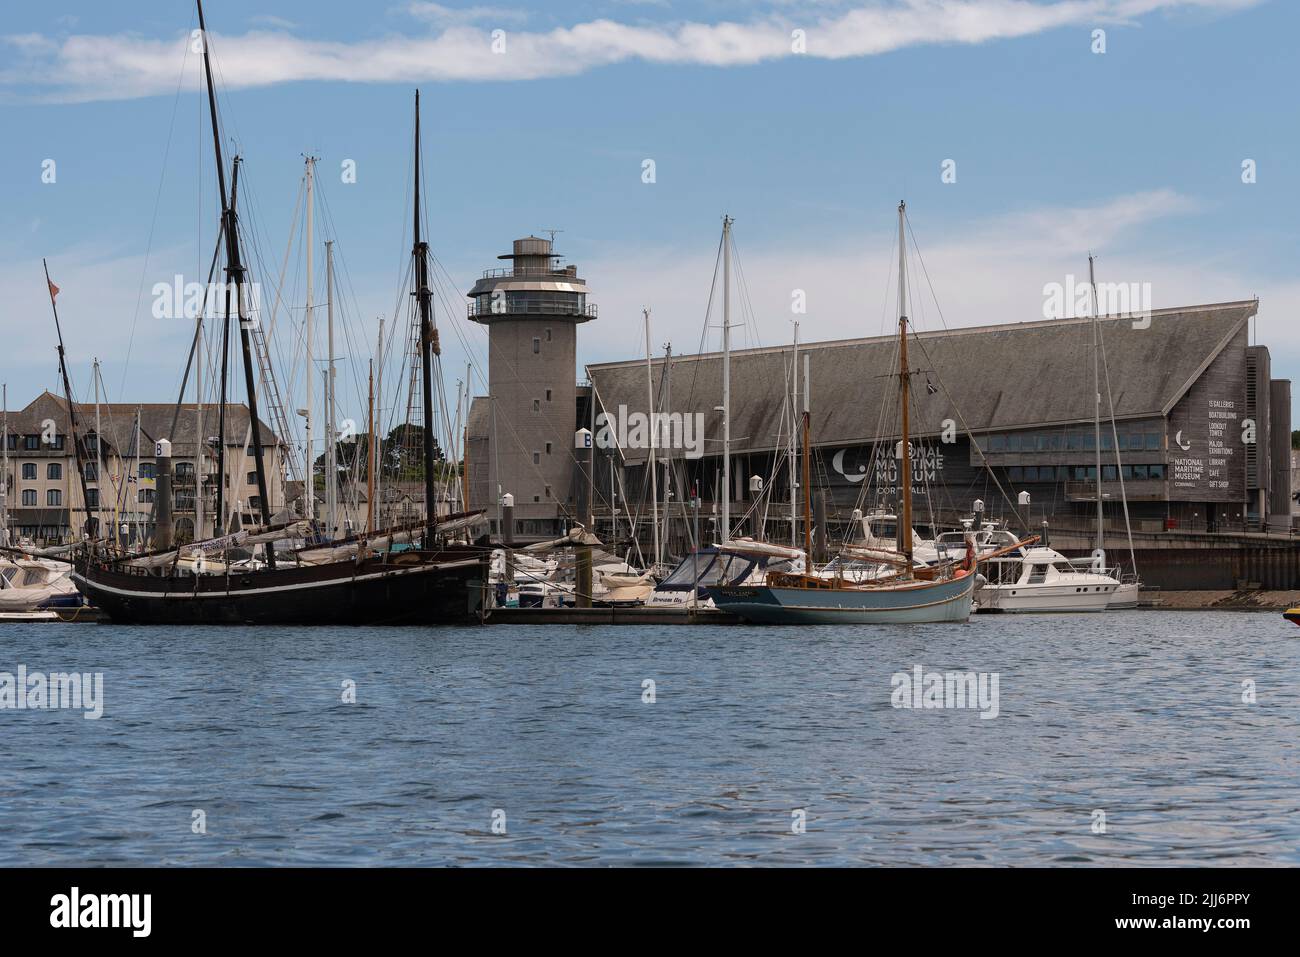 Falmouth, Cornwall, England, UK. 2022. The National Maritime Museum, on the harbourside in Falmouth, Cornwall showing exterior exhibits. Stock Photo